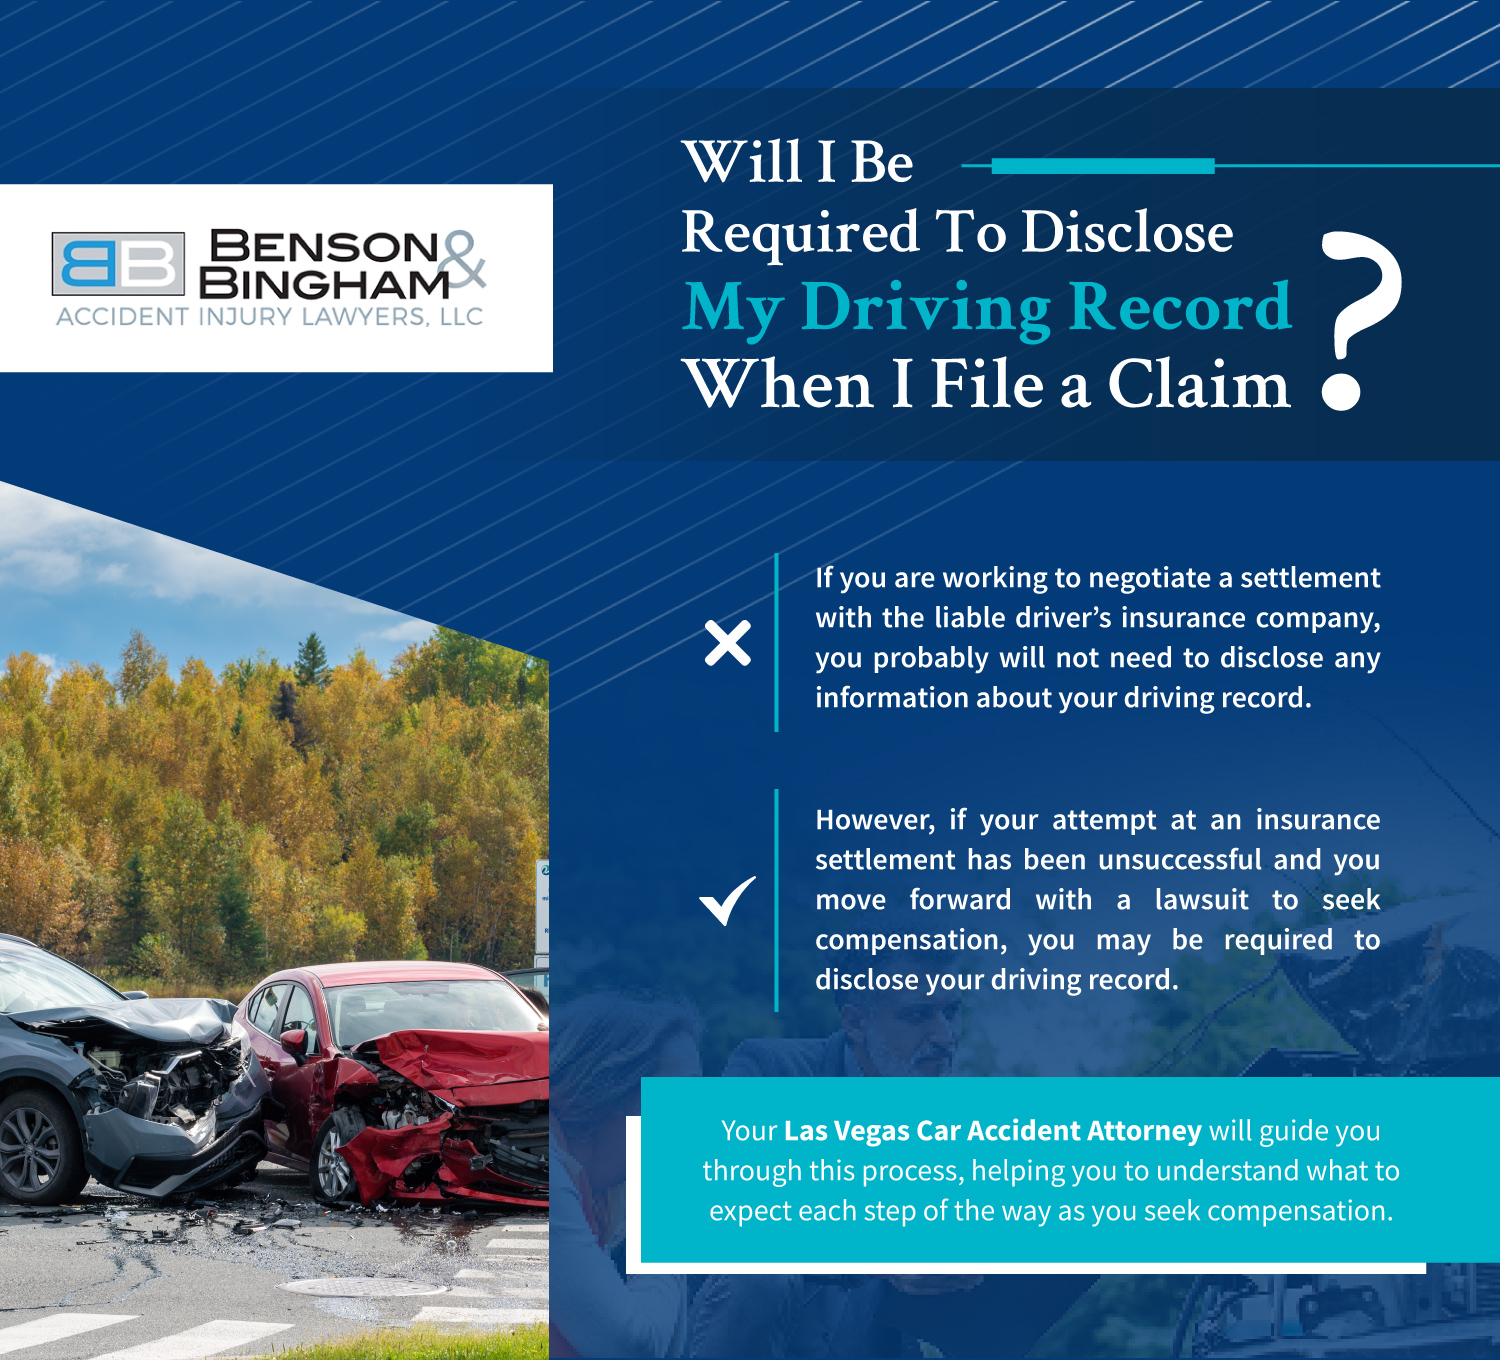 Can a Bad Driving Record Ruin Your Car Accident Claim?